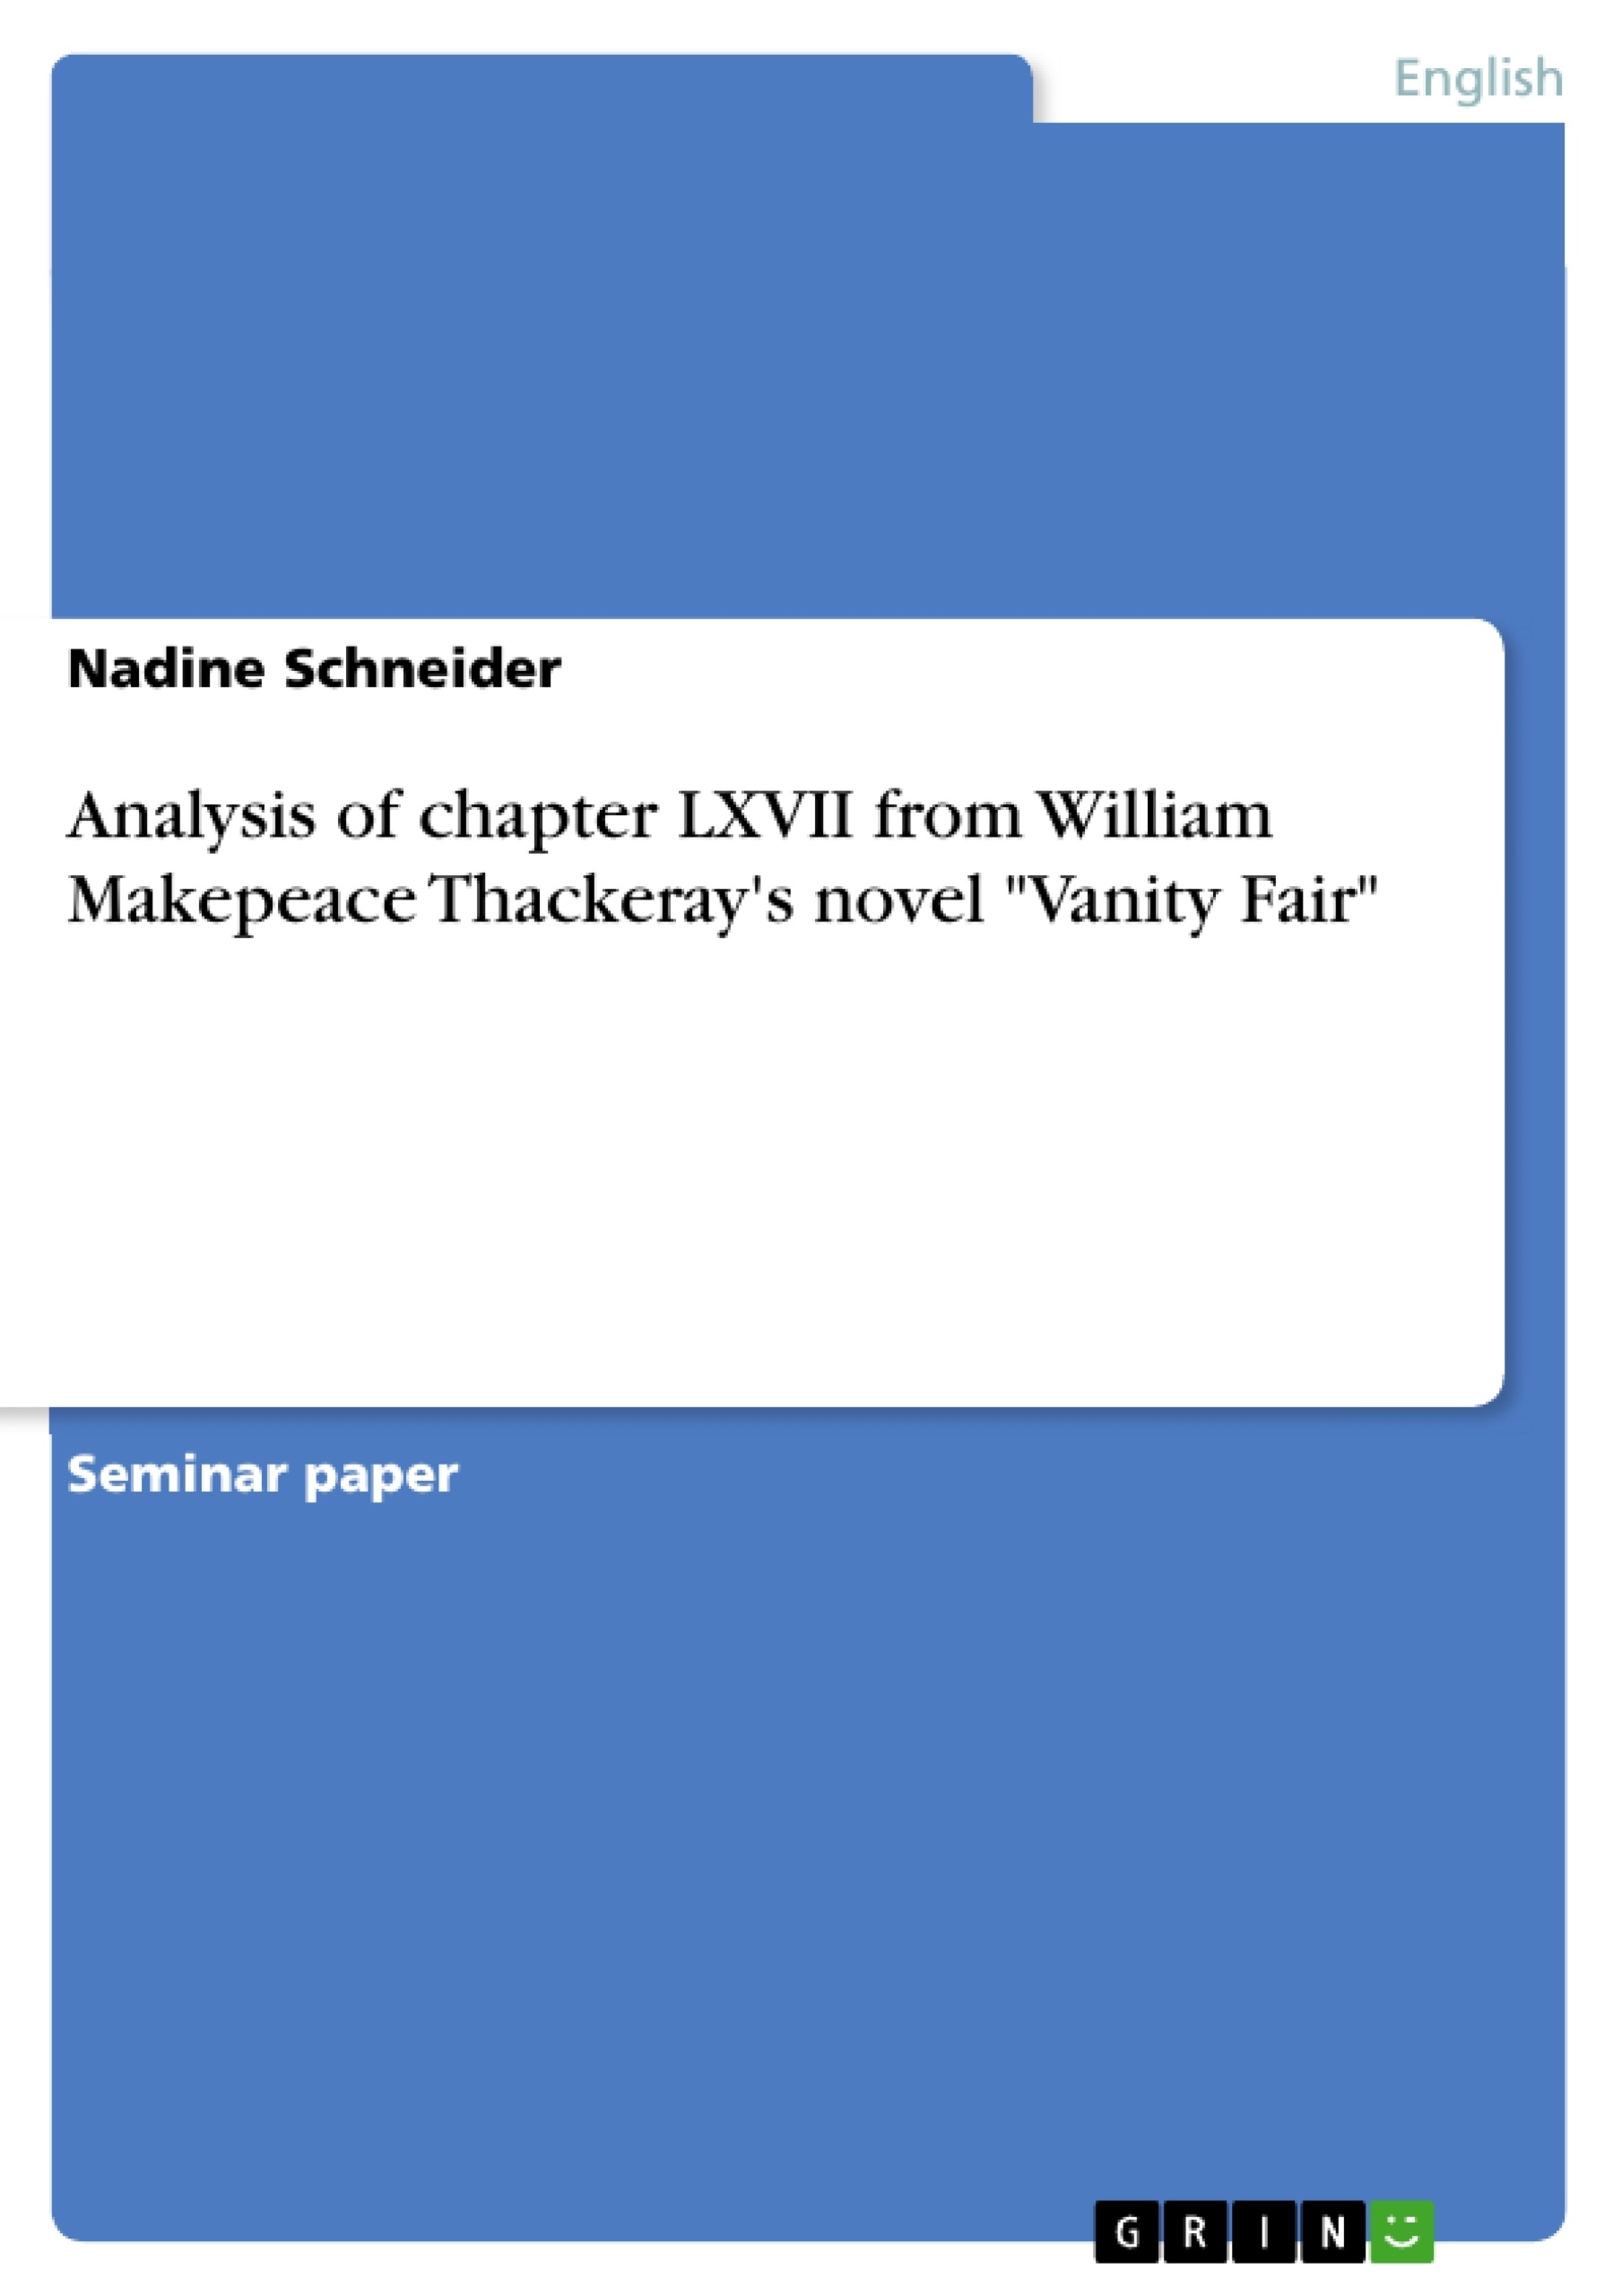 Título: Analysis of chapter LXVII from William Makepeace Thackeray's novel "Vanity Fair"